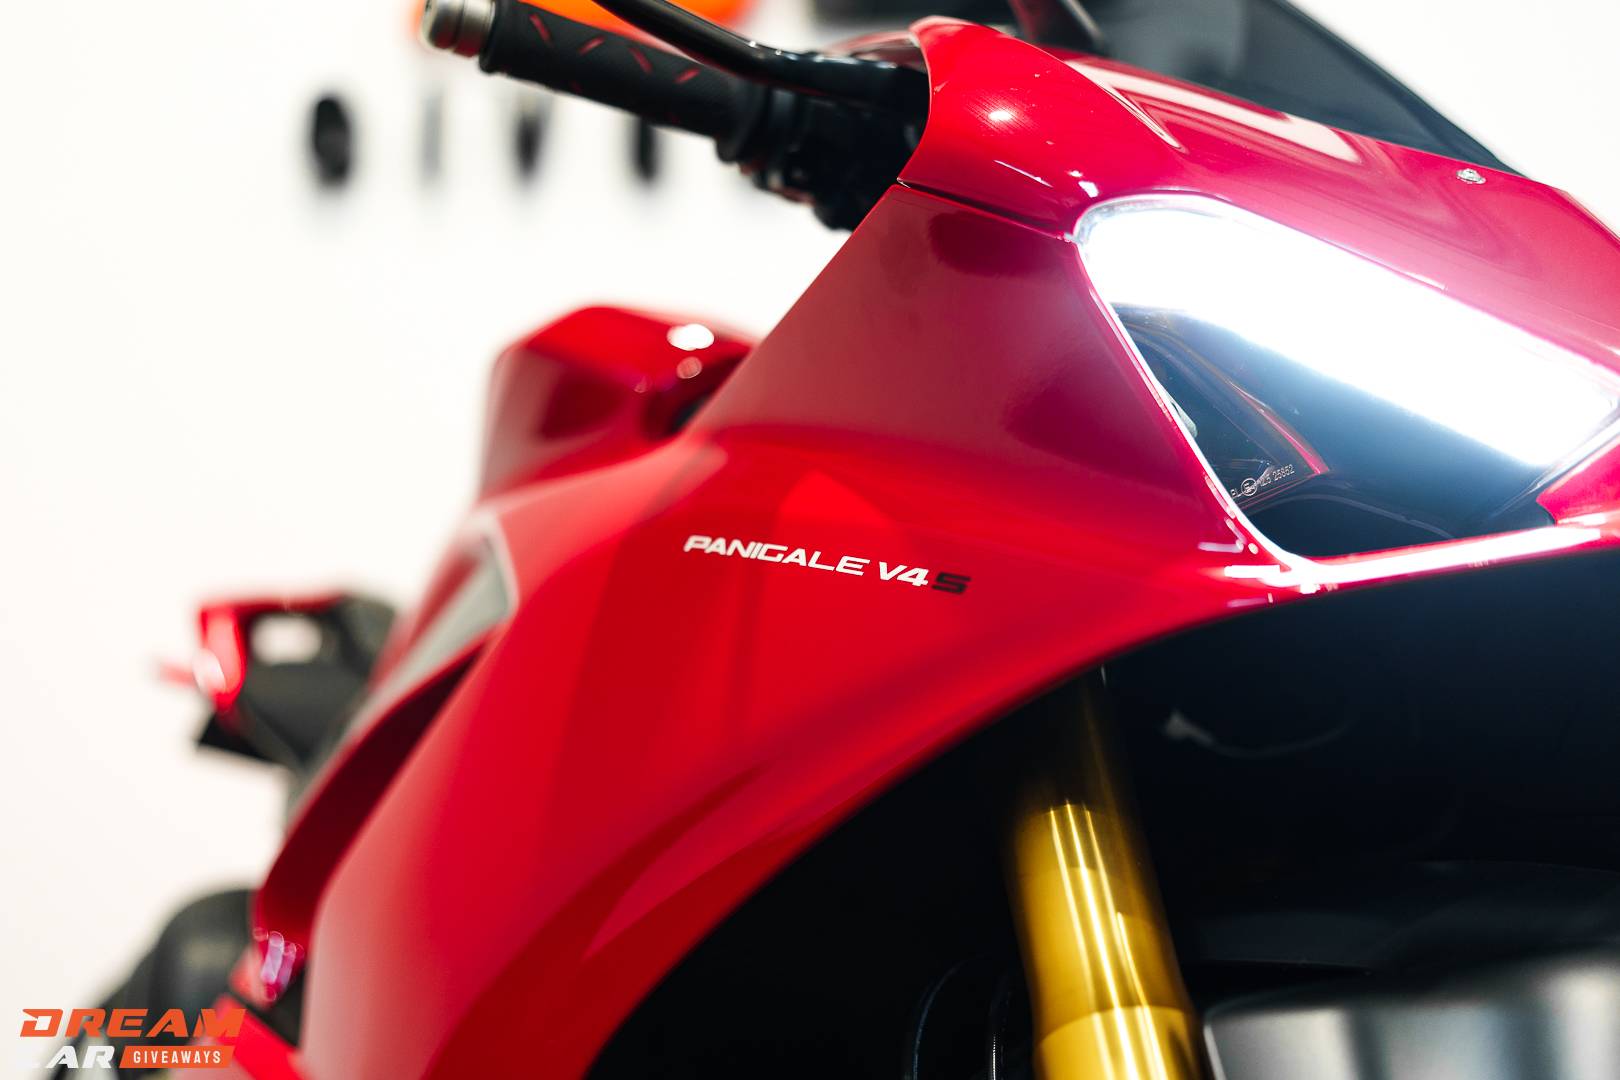 Win this Ducati V4S & £1,000 - Only 2707 Entries